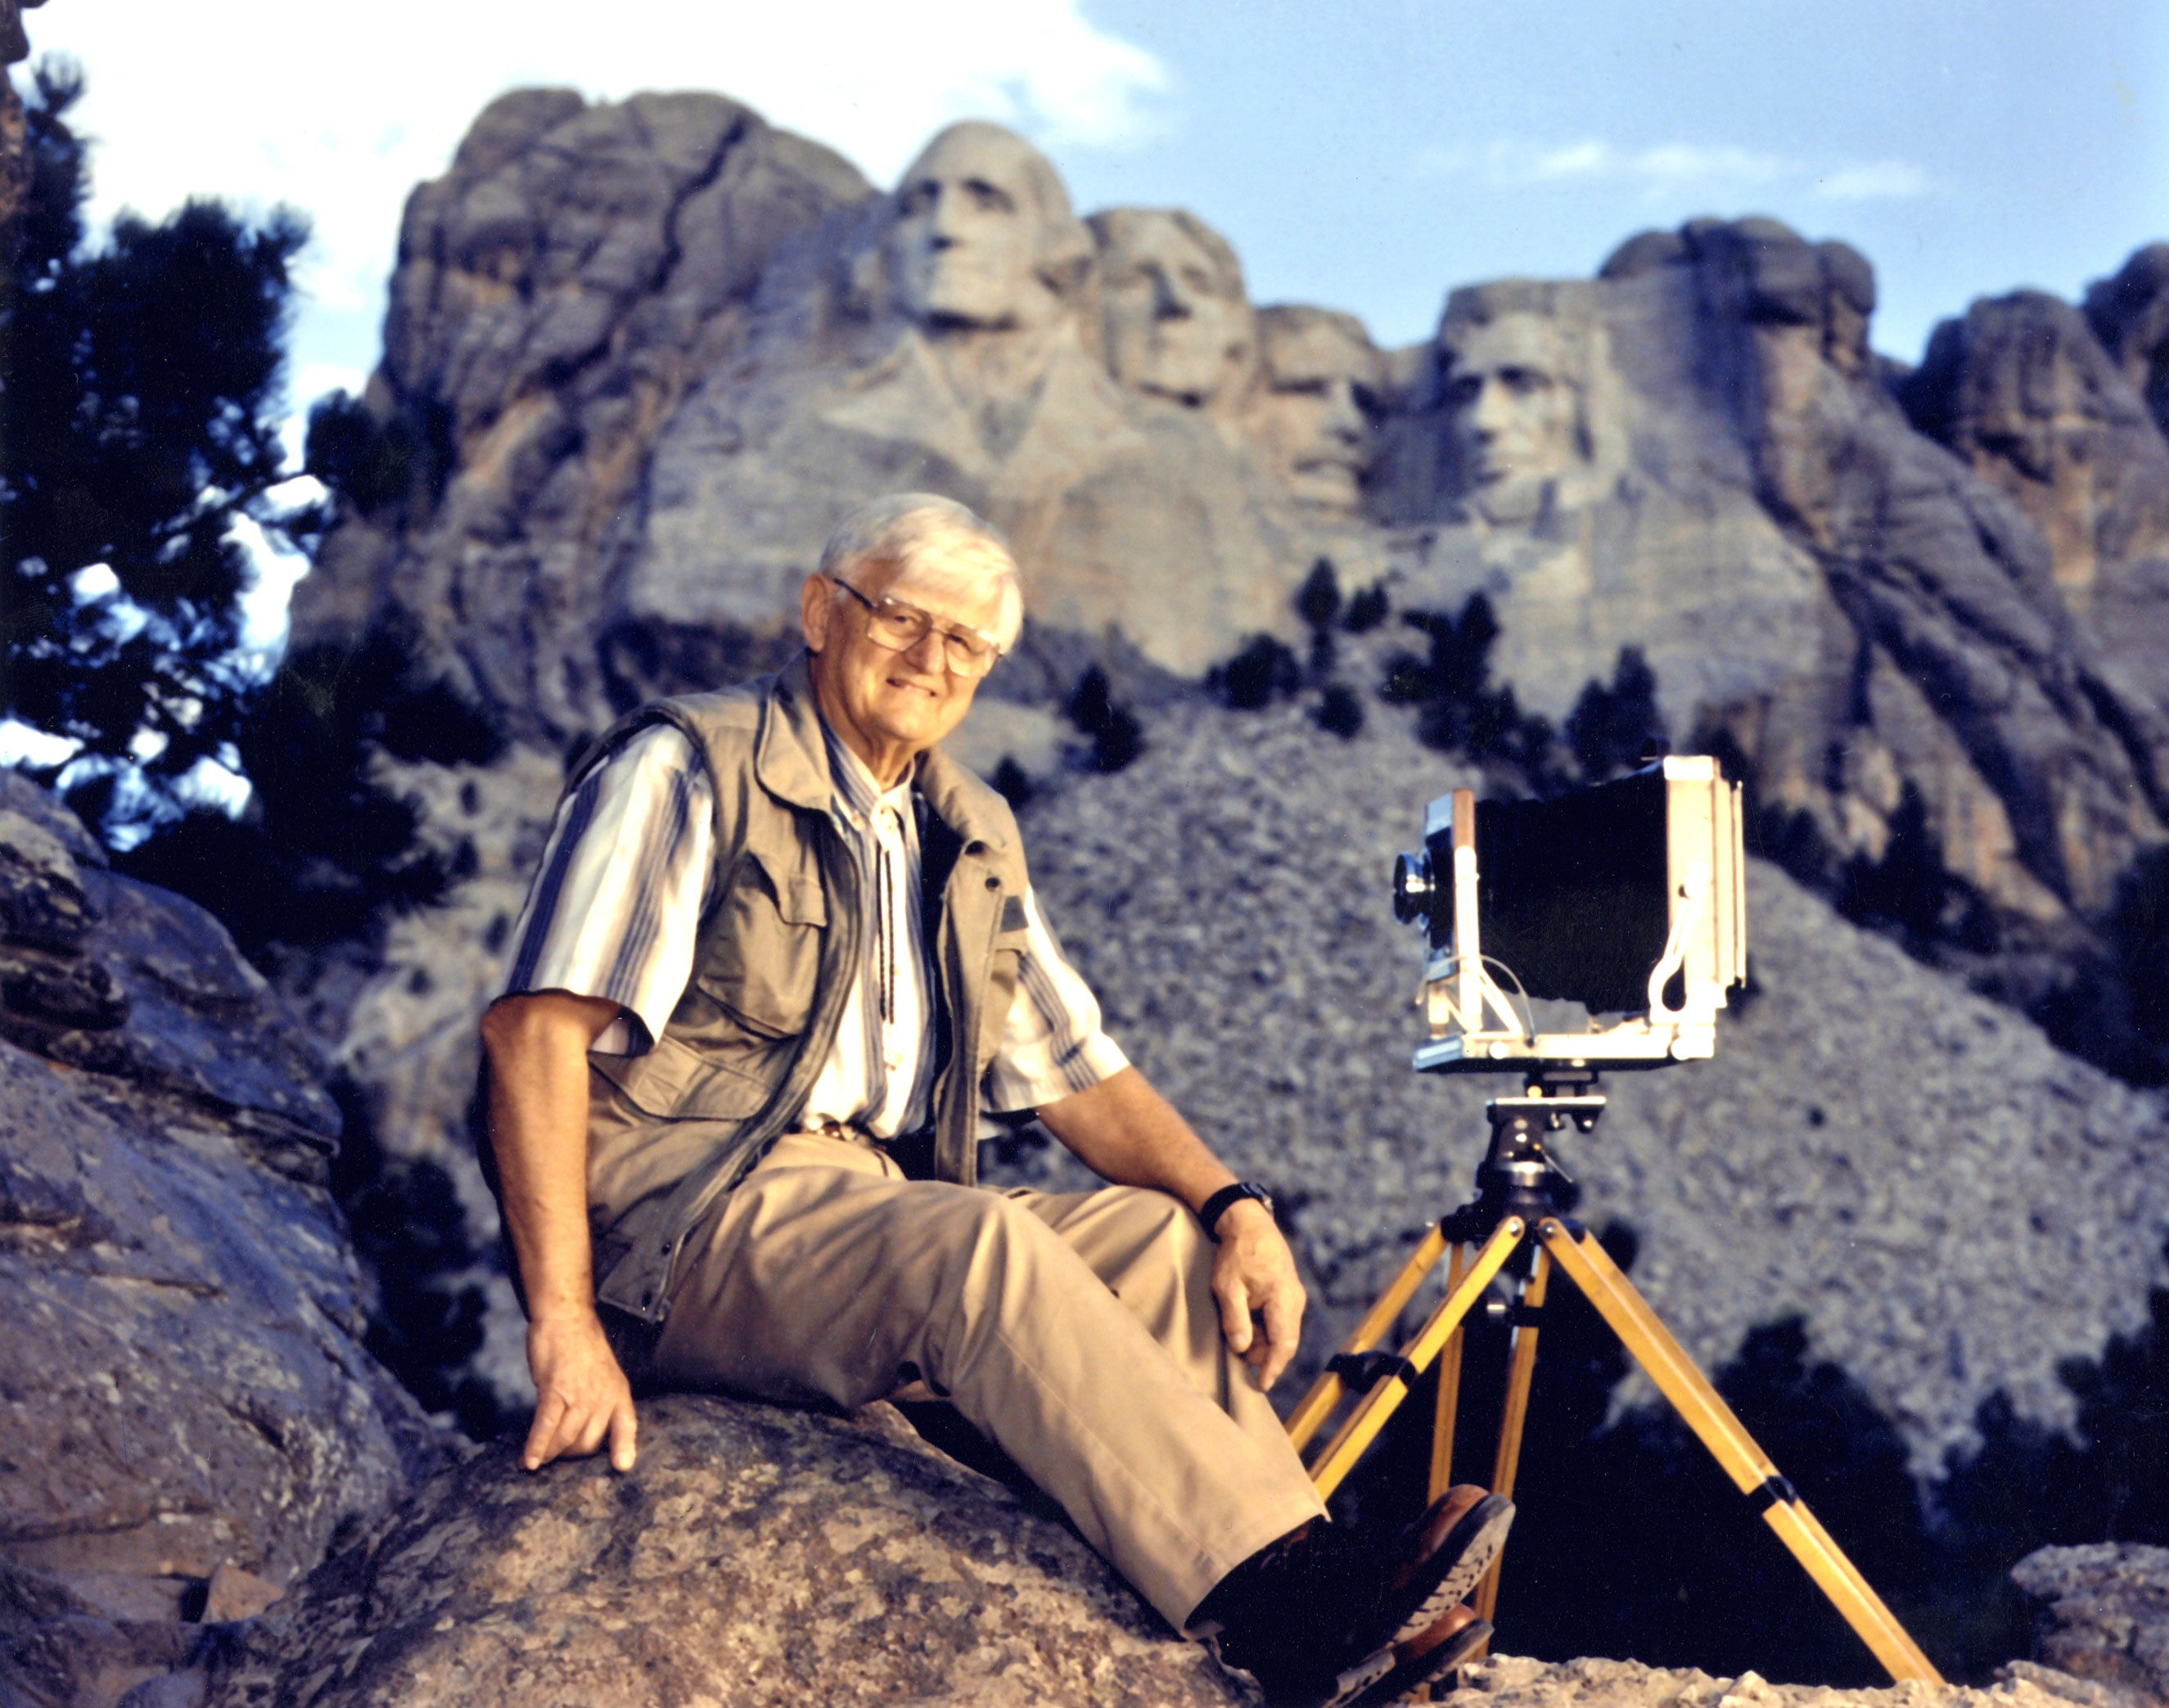 Bill Groethe with his 8x10 camera in front of Mount Rushmore, c. 1990s. (Courtesy of Bill Groethe)